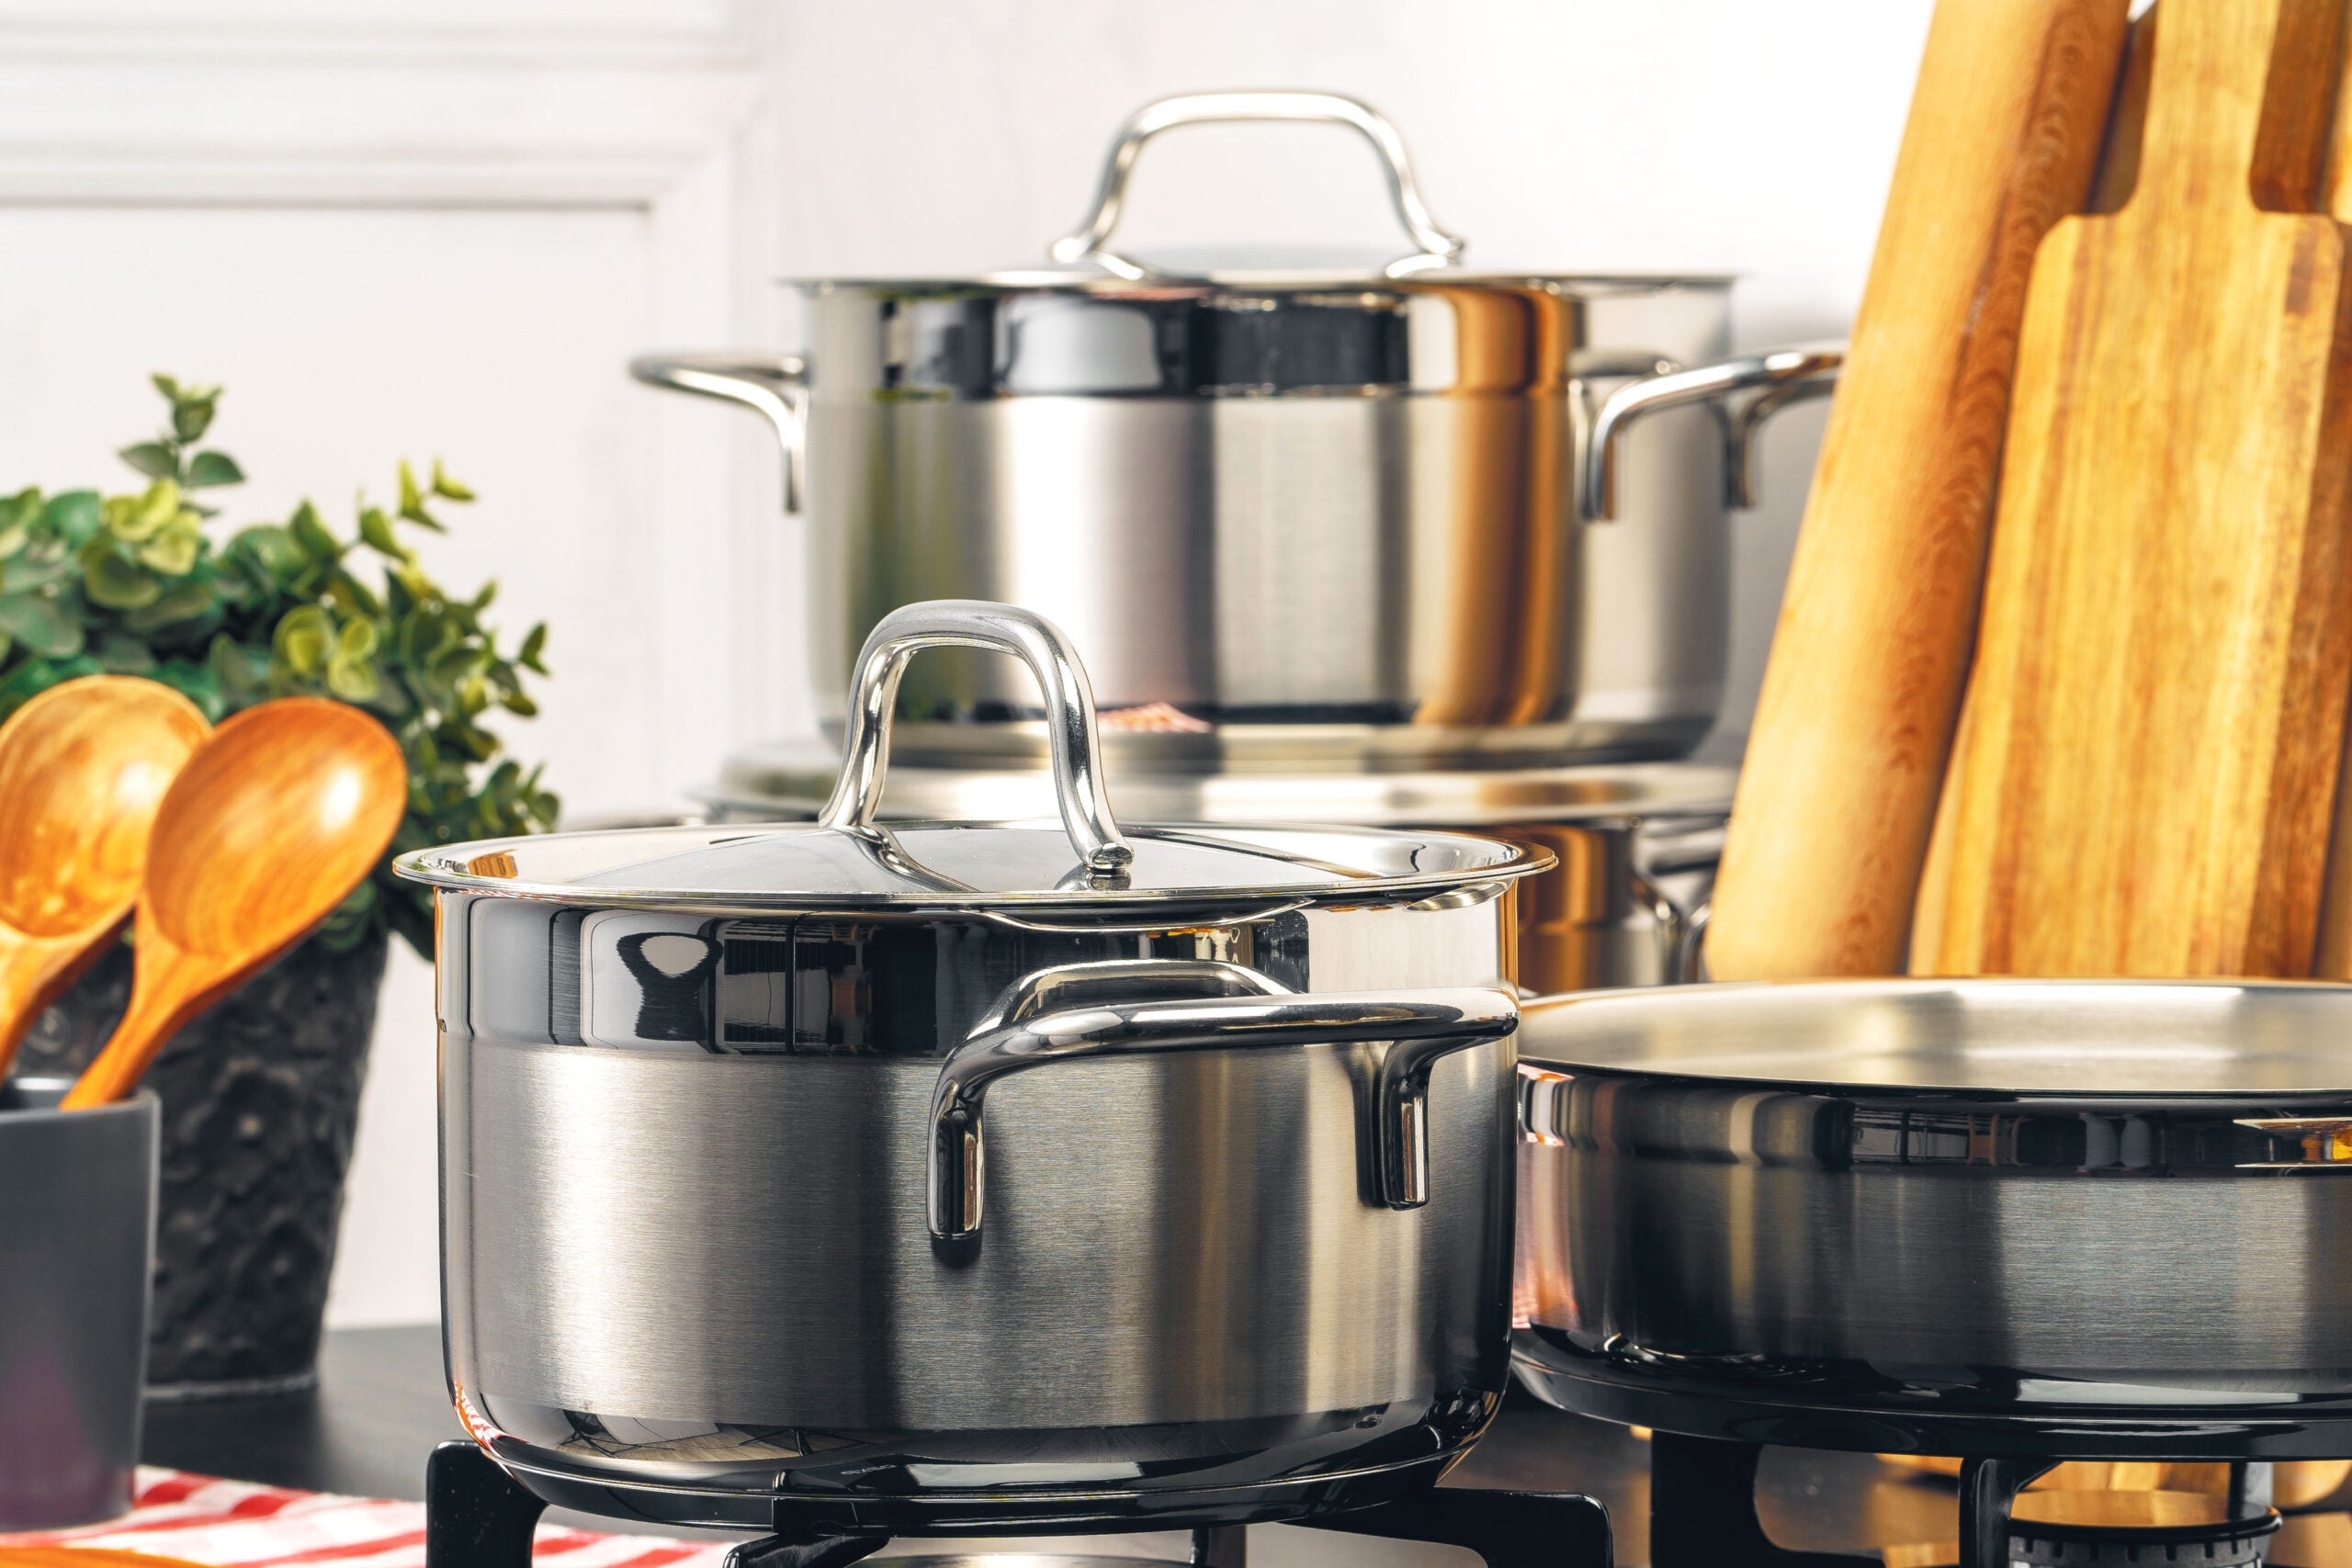 https://www.saveur.com/uploads/2020/06/08/00-LEAD-Stainless-steel-cookware-sets-saveur-scaled.jpg?auto=webp